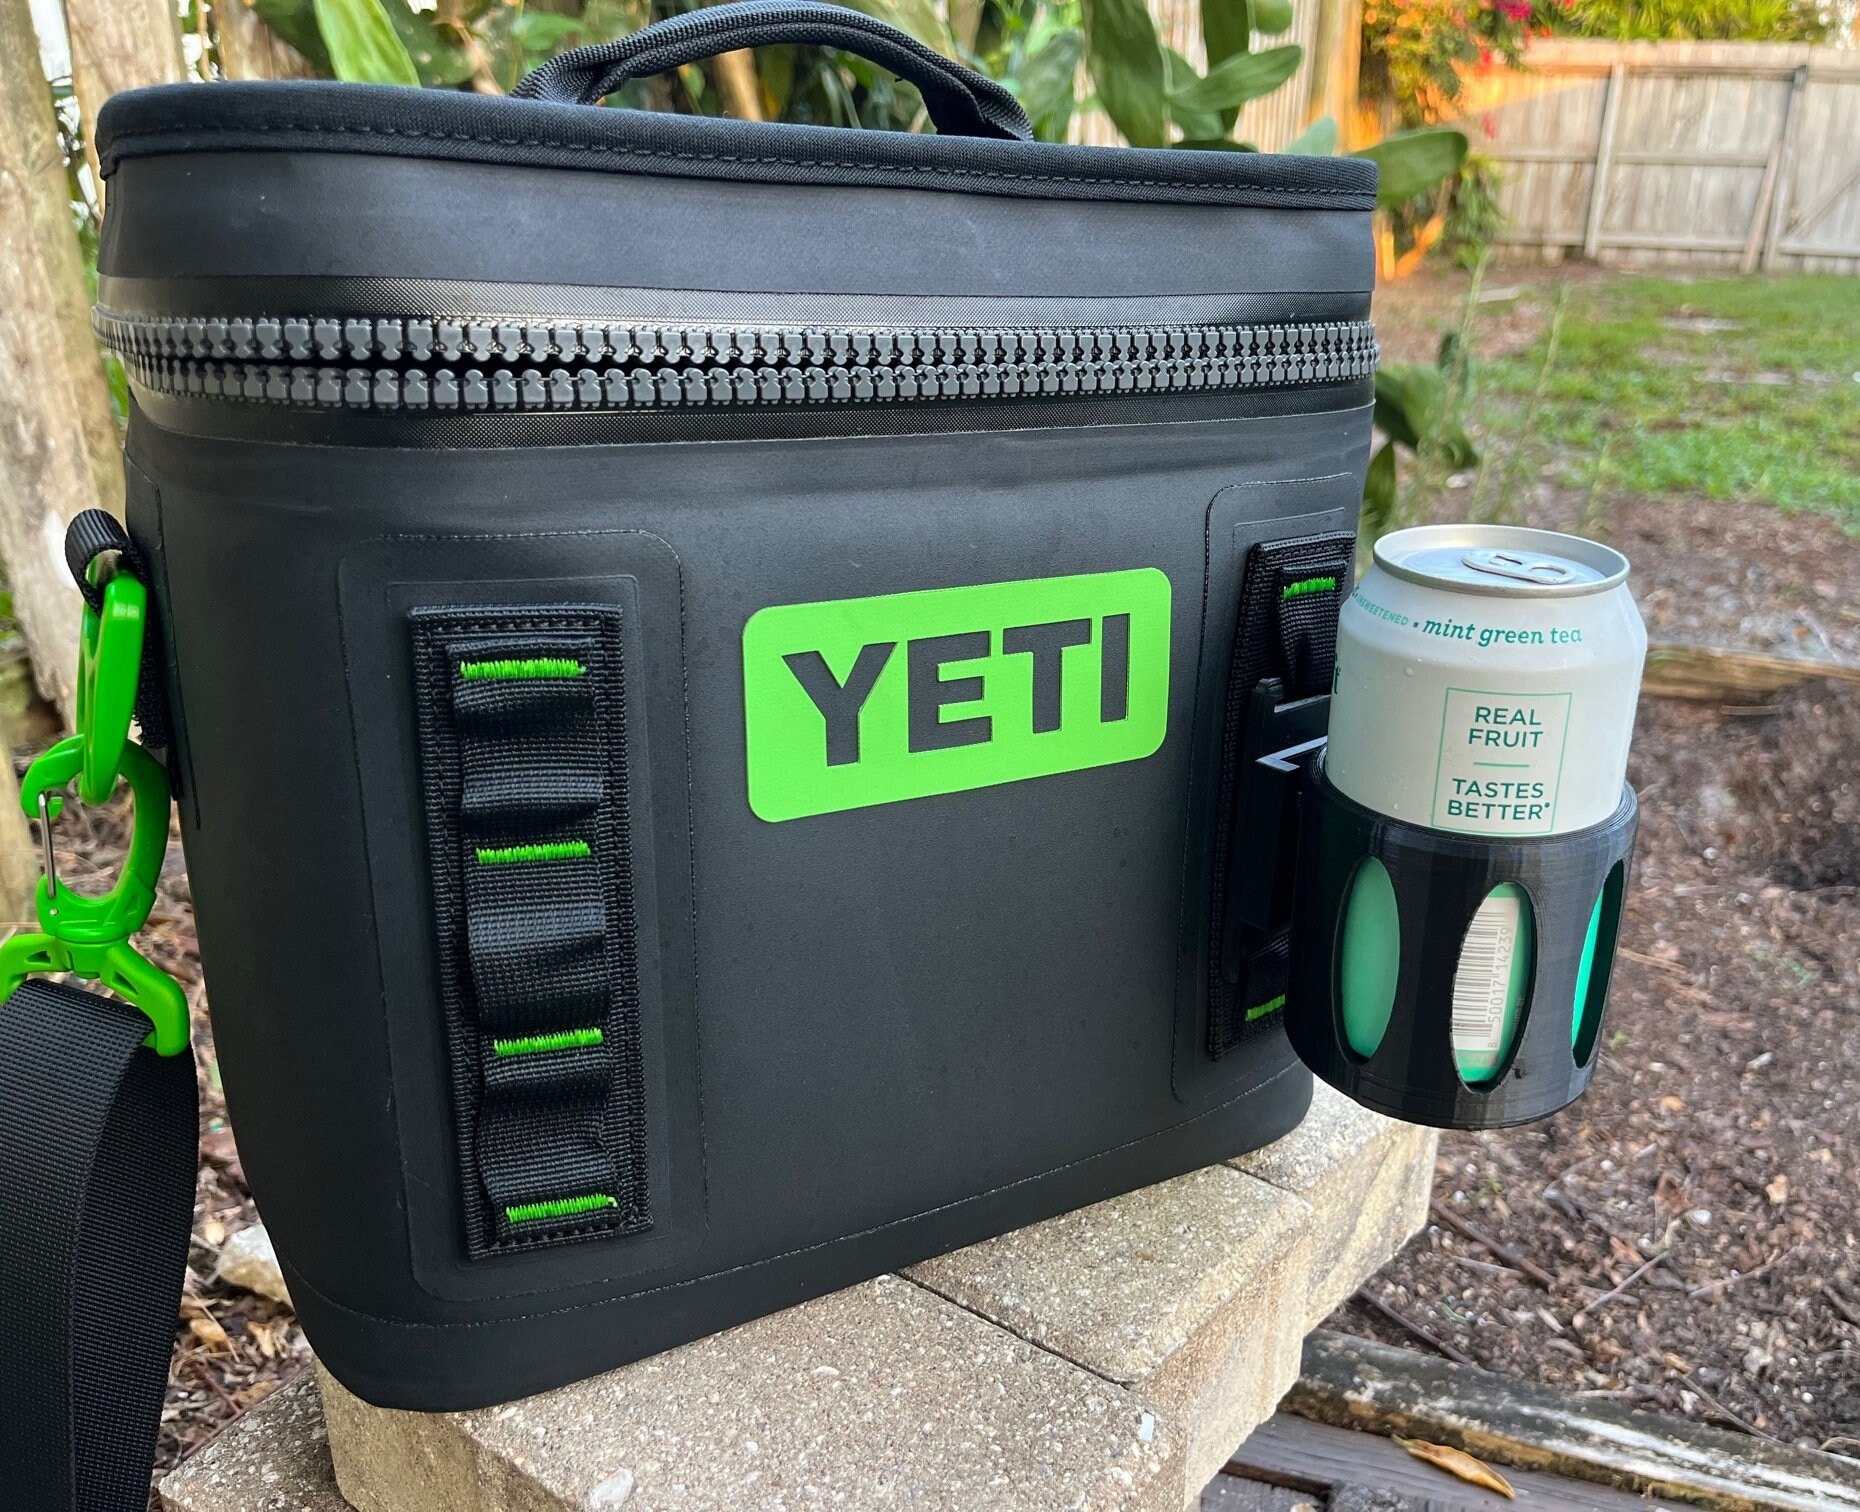 Yeti Cooler Accessory Cup Holder for Yeti Cooler Drink Holder Yeti  Attachment Cupholder Yeti Accessory Yeti Cup Holder Gift Idea 